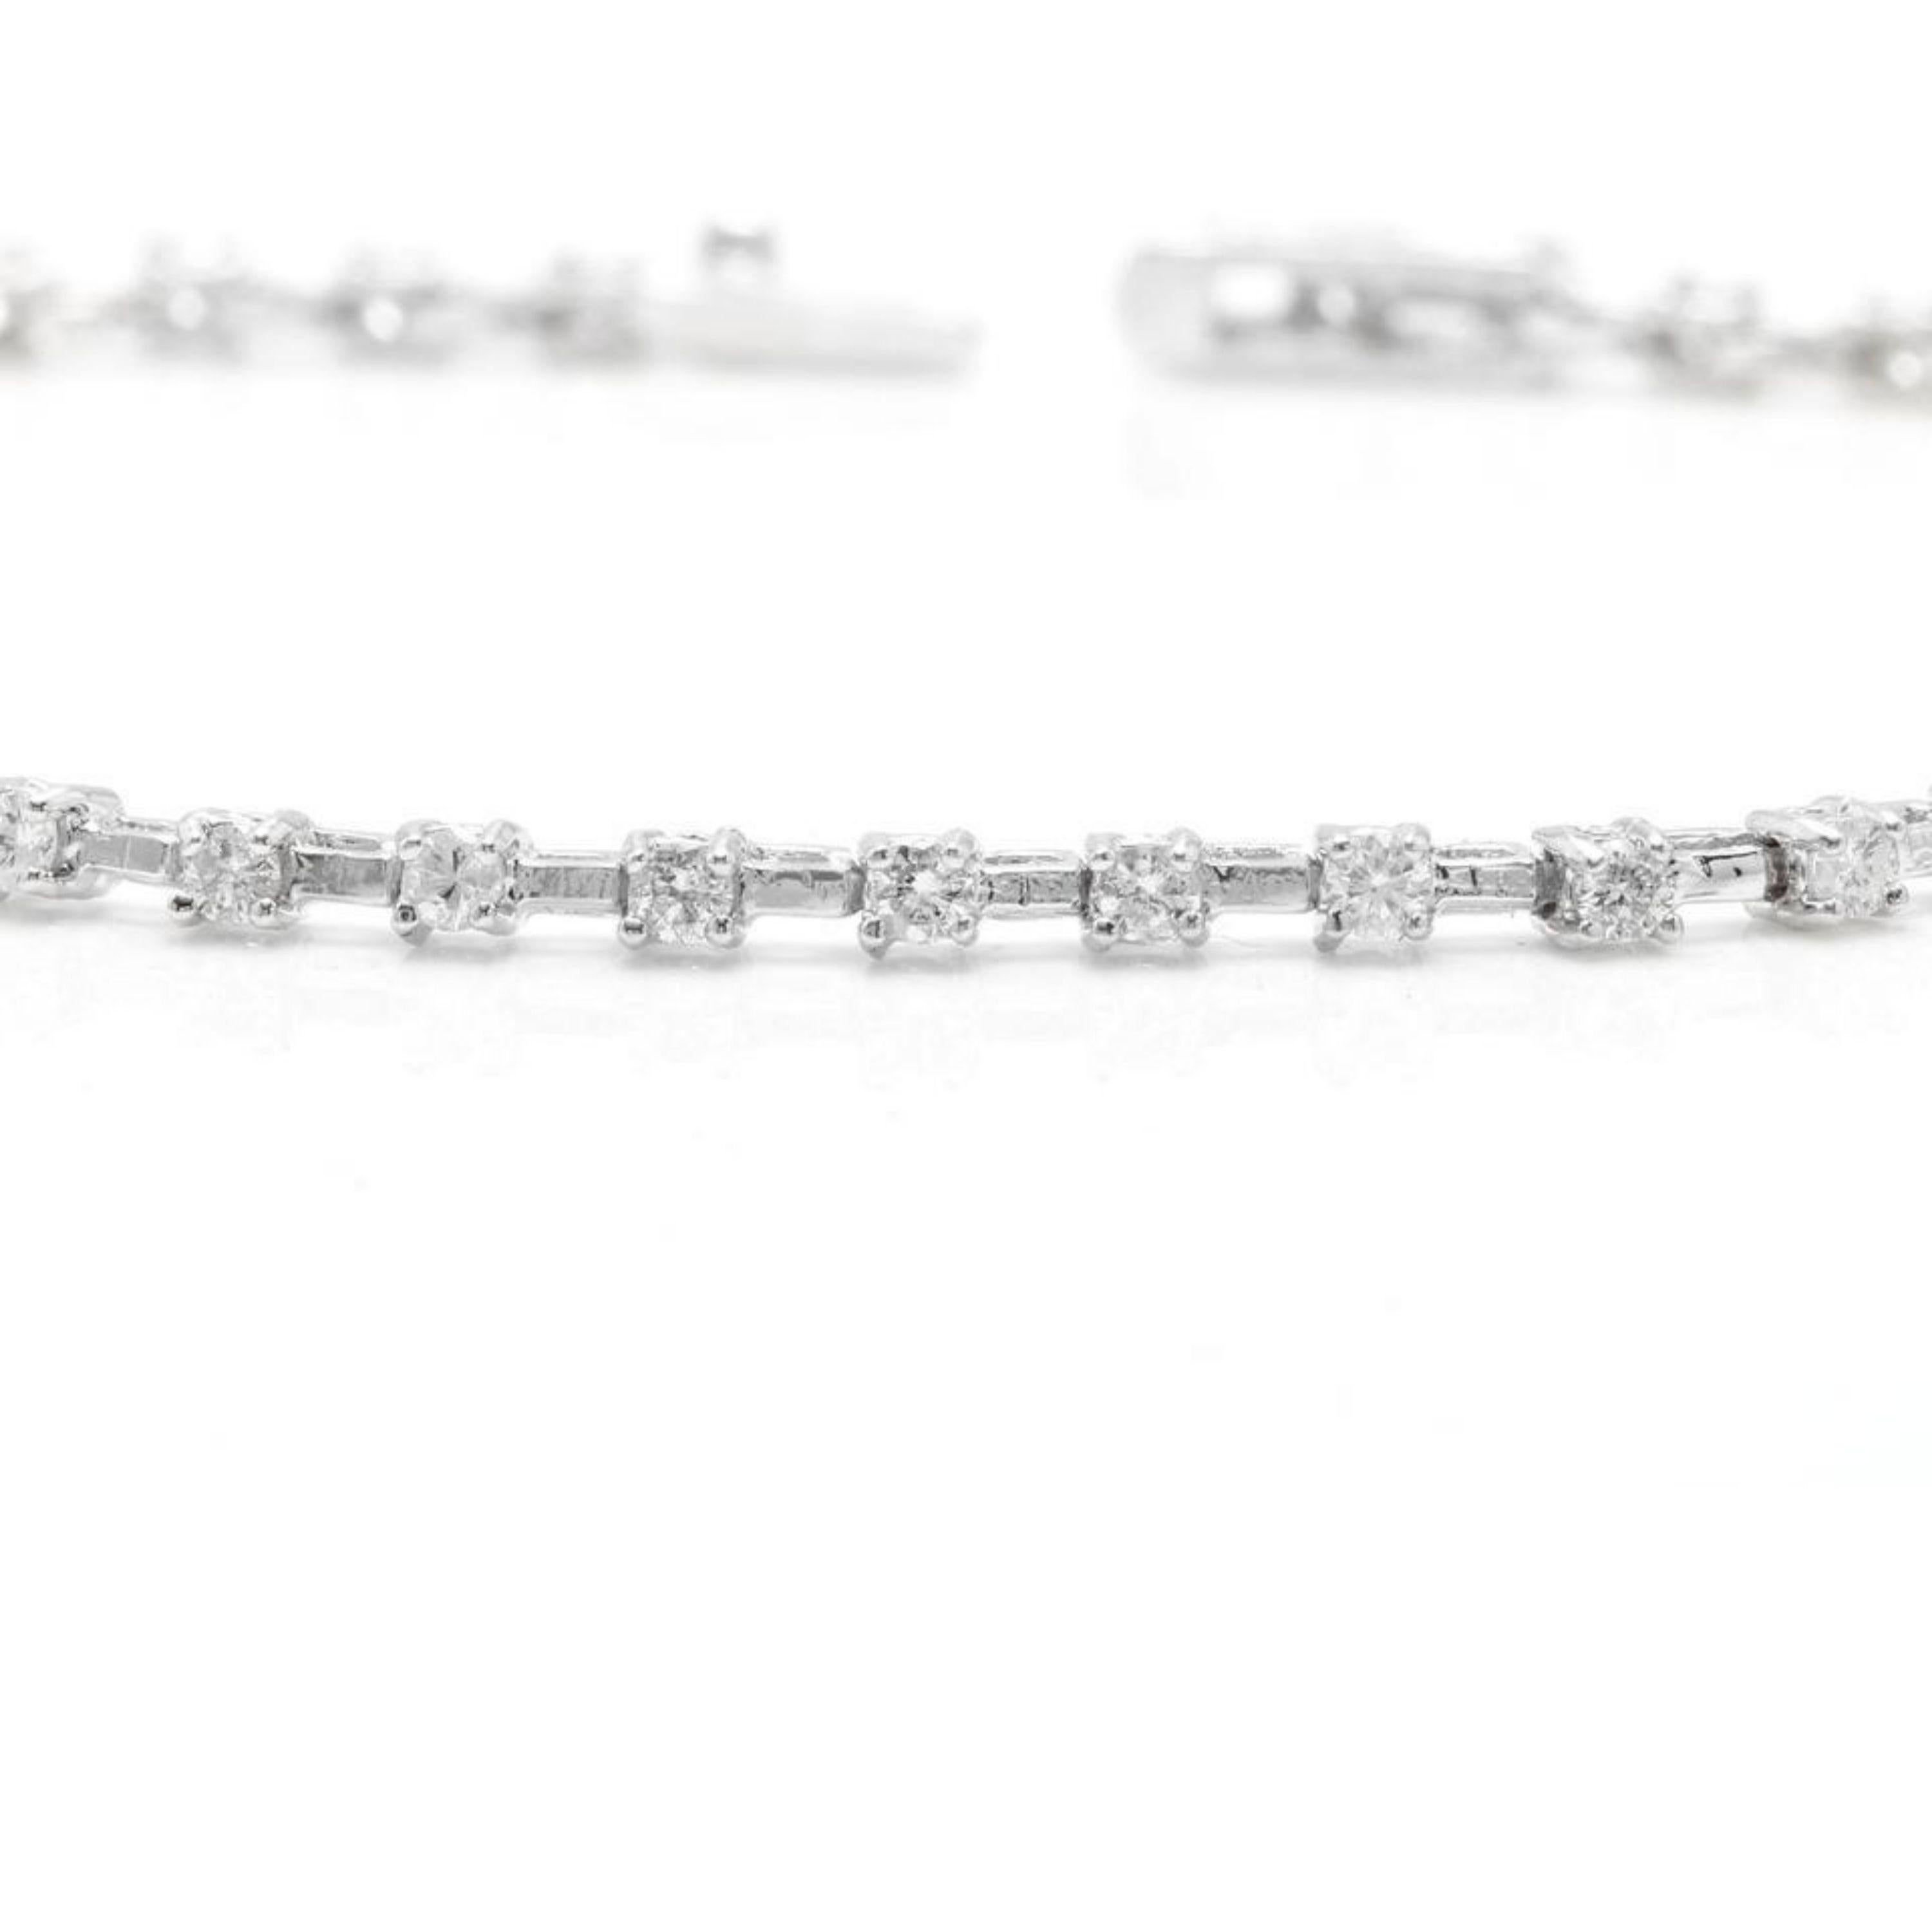 Very Impressive 1.40 Carats Natural Diamond 14K Solid White Gold Bracelet

STAMPED: 14K

Total Natural Round Diamonds Weight: Approx. 1.40 Carats (color H / Clarity SI1-SI2)

Bracelet Length is: 7.25 inches

Width: 2.4mm

Bracelet total weight: